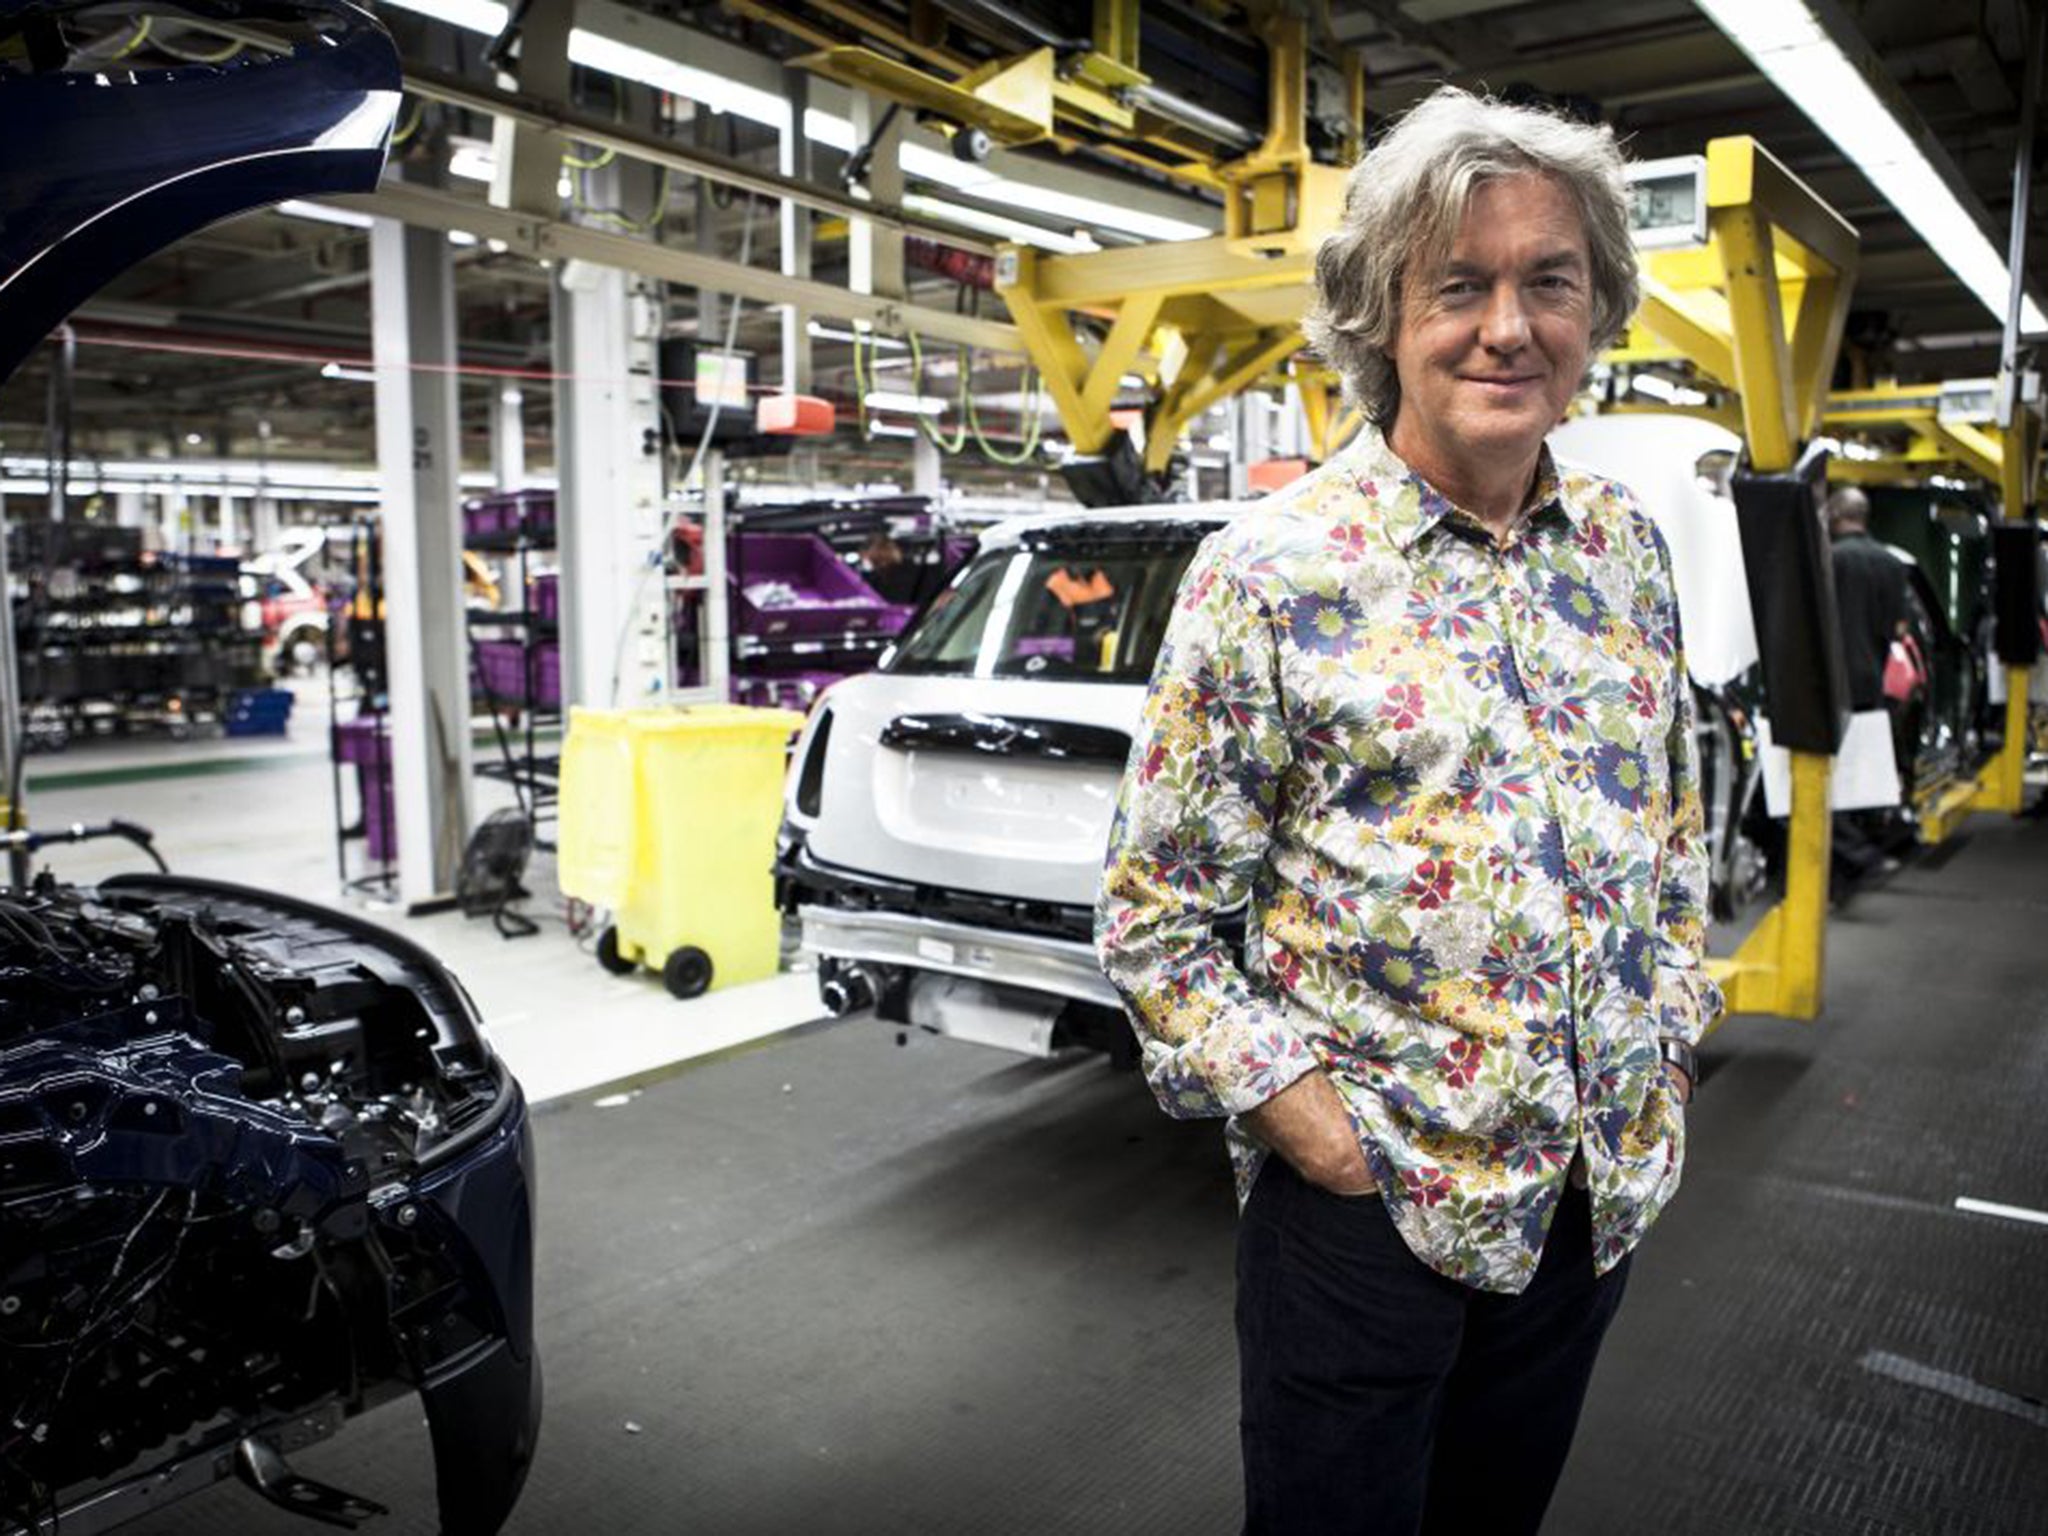 James May presenting Building Cars Live from Cowley